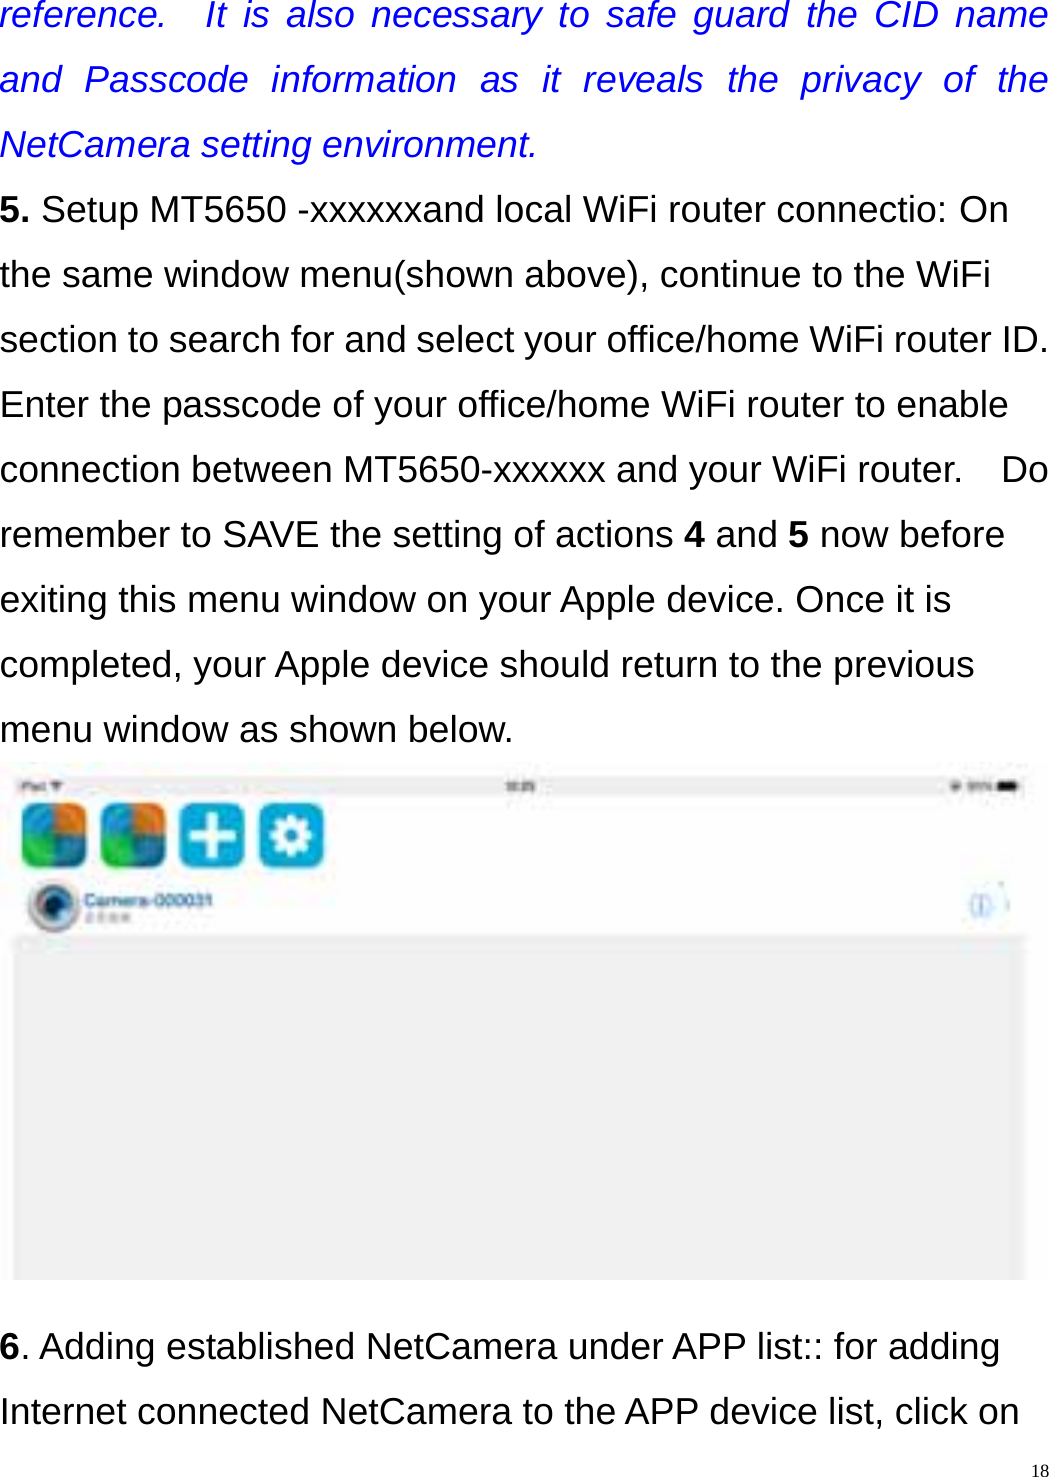    18reference.  It is also necessary to safe guard the CID name and Passcode information as it reveals the privacy of the NetCamera setting environment. 5. Setup MT5650 -xxxxxxand local WiFi router connectio: On the same window menu(shown above), continue to the WiFi section to search for and select your office/home WiFi router ID.   Enter the passcode of your office/home WiFi router to enable connection between MT5650-xxxxxx and your WiFi router.    Do remember to SAVE the setting of actions 4 and 5 now before exiting this menu window on your Apple device. Once it is completed, your Apple device should return to the previous menu window as shown below.   6. Adding established NetCamera under APP list:: for adding Internet connected NetCamera to the APP device list, click on 